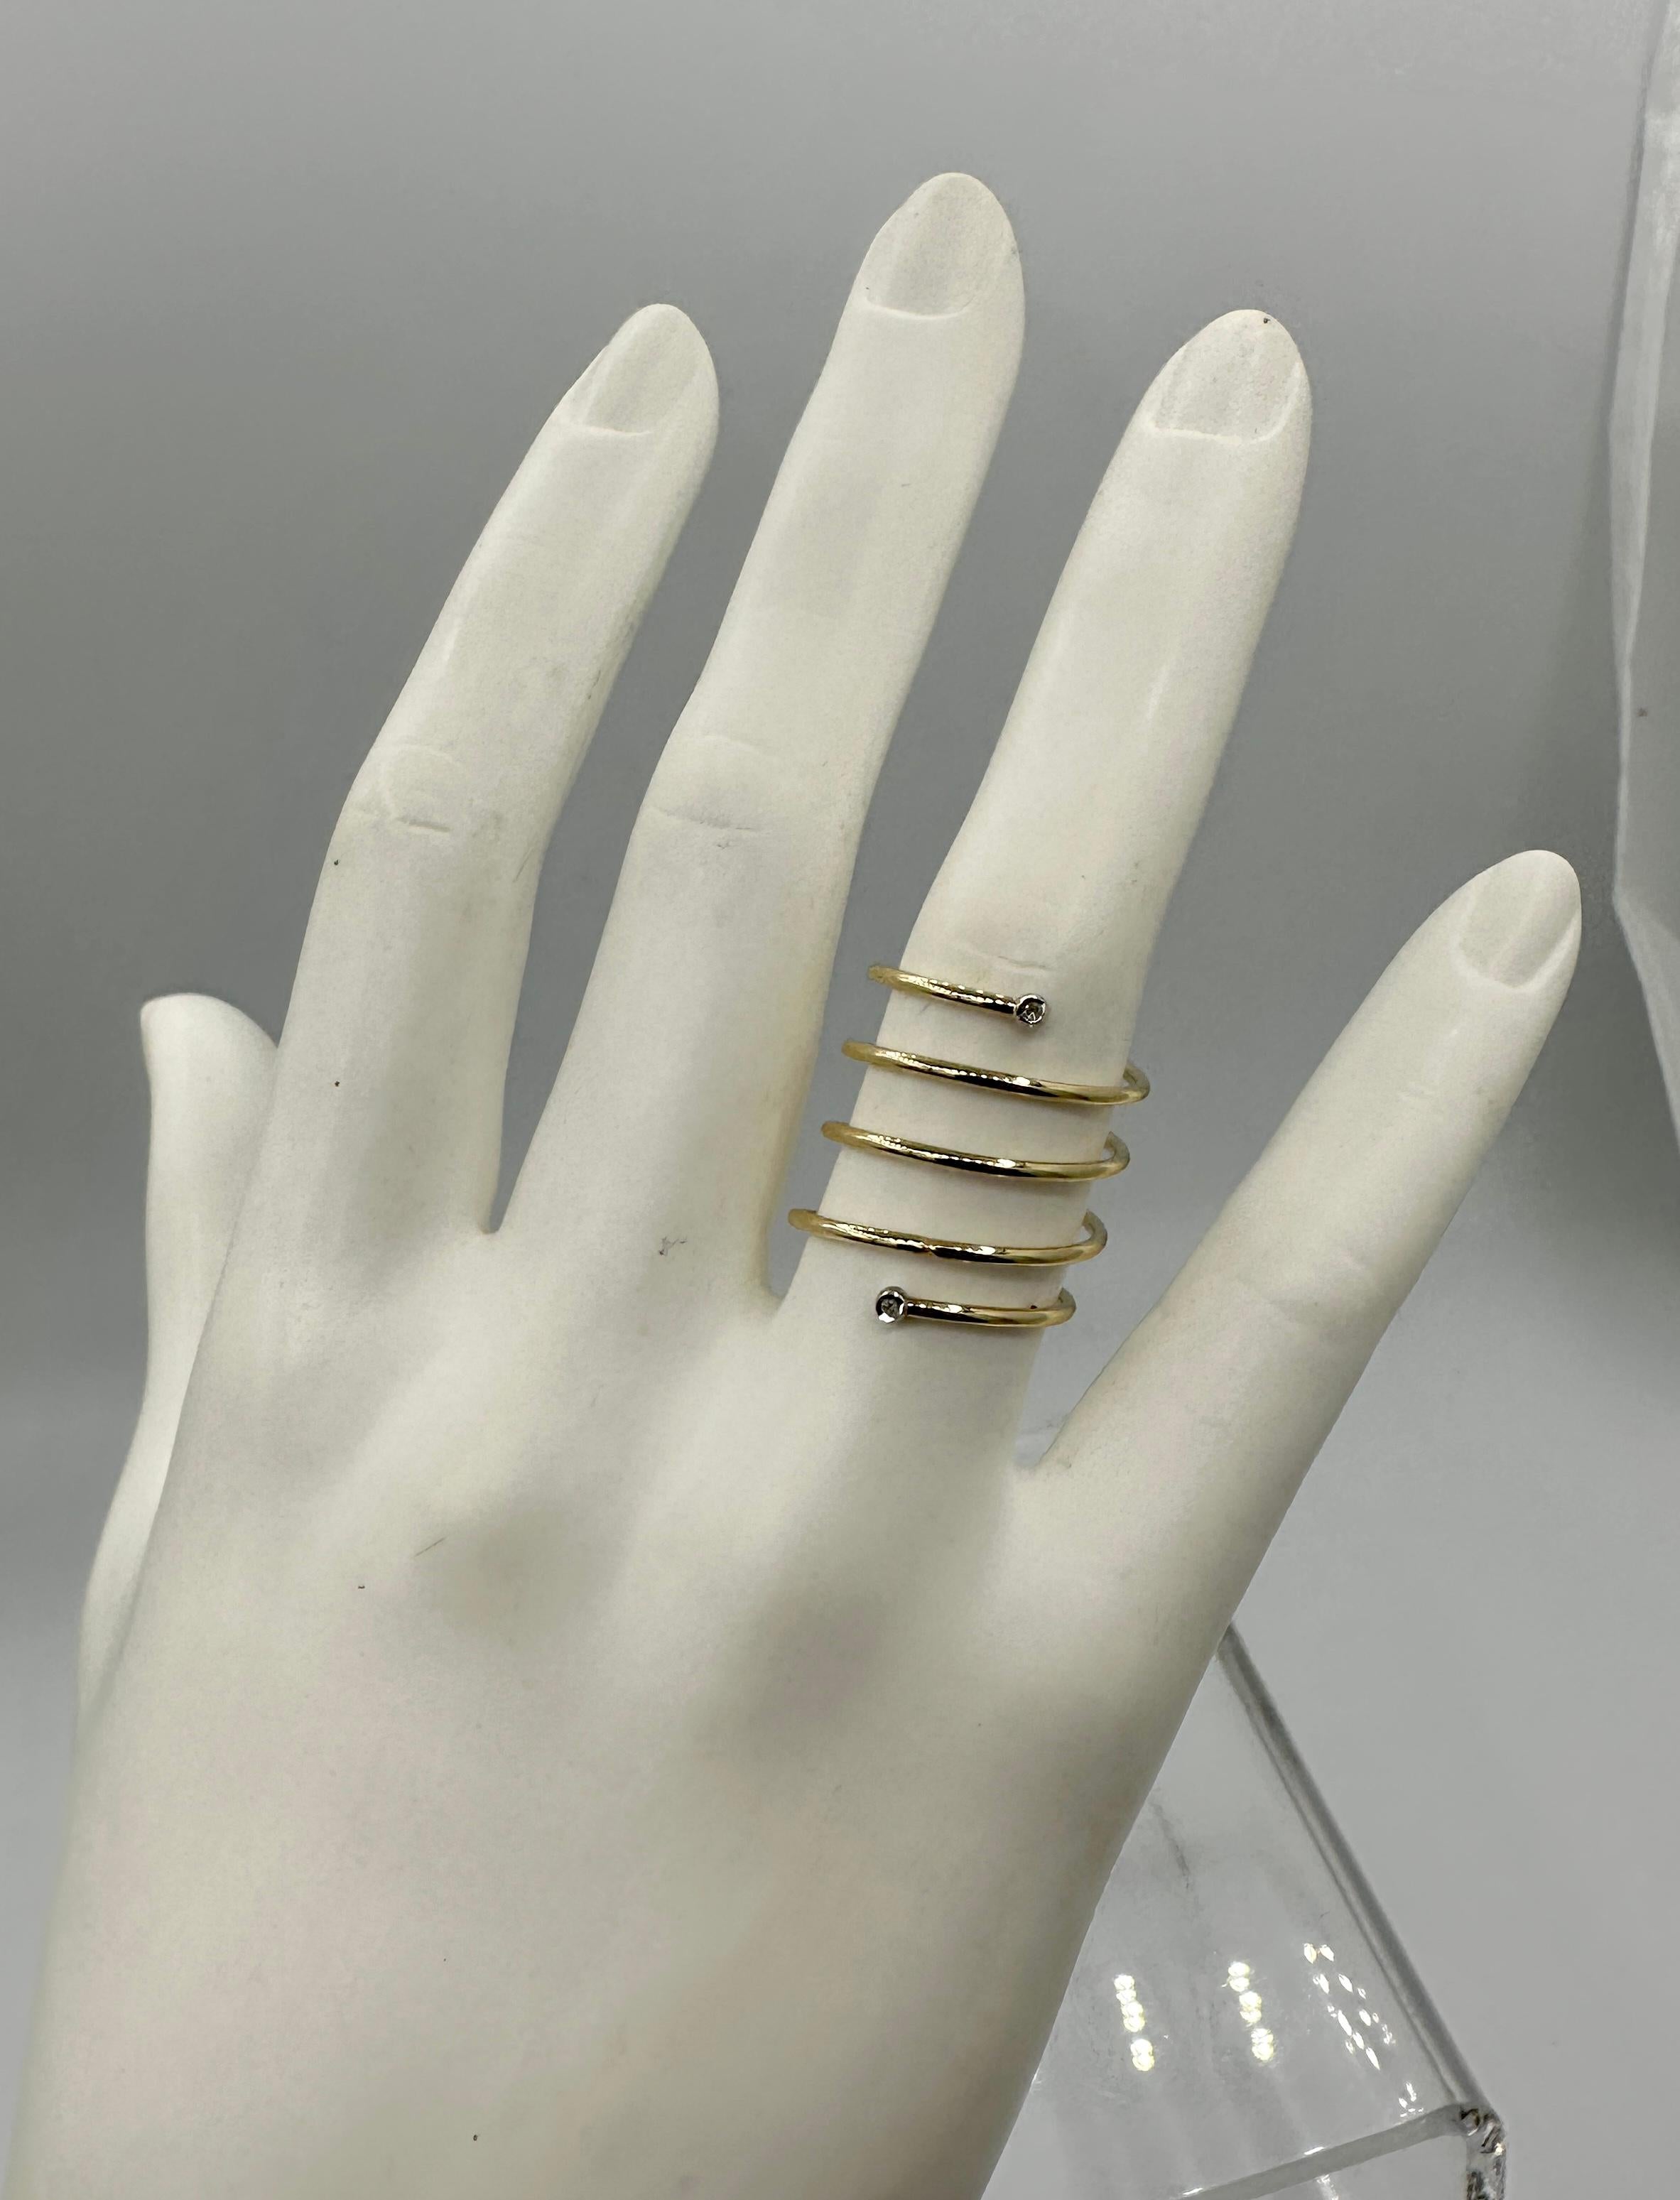 Diamond Spiral Ring Snake Coil Wrap Ring White And Yellow Gold Size 7 In Excellent Condition For Sale In New York, NY